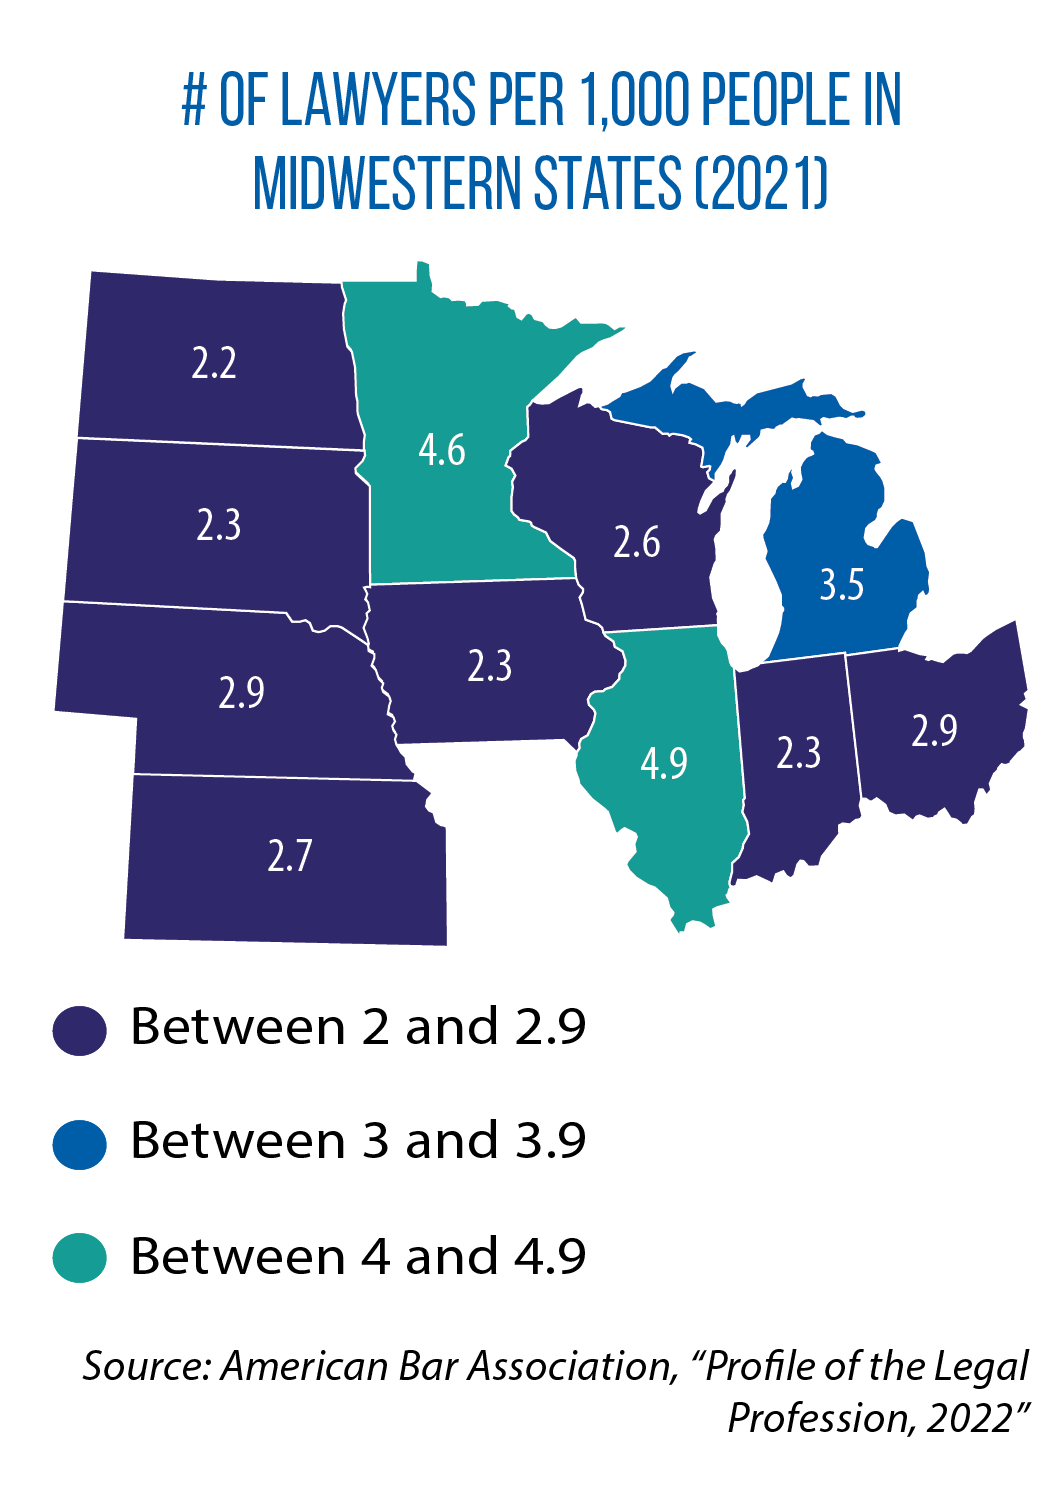 Map showing the number of lawyers per 1,000 people in Midwestern states as of 2021.